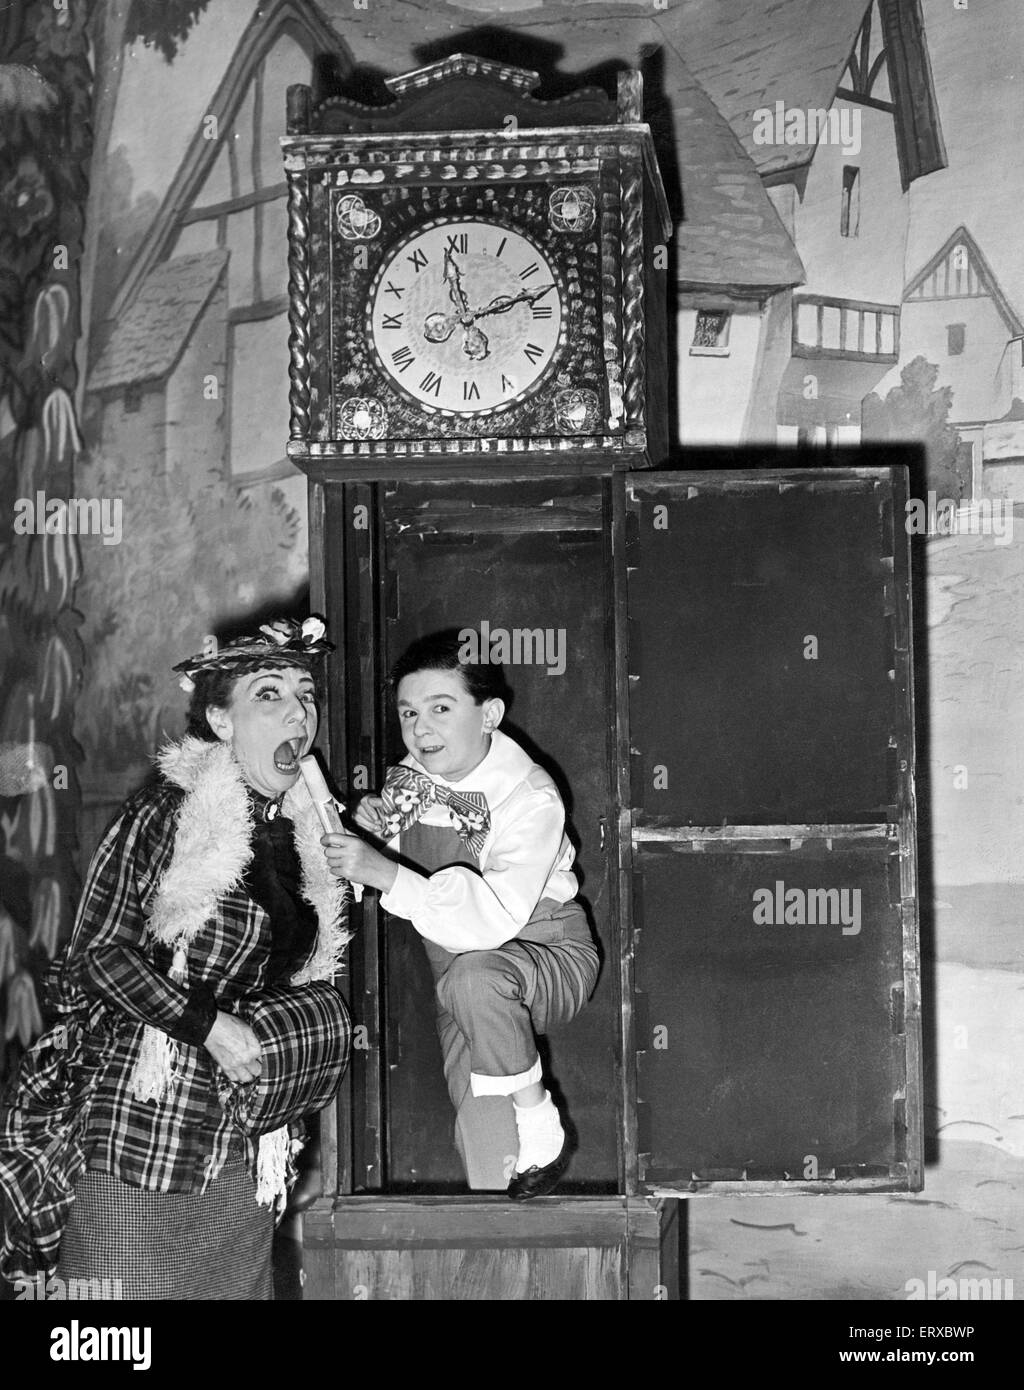 Hylda Baker and Jimmy Clitheroe during last nights dress rehearsal of the Empire Theatre's pantomime Jack and the Beanstalk. 23rd December 1959. Stock Photo